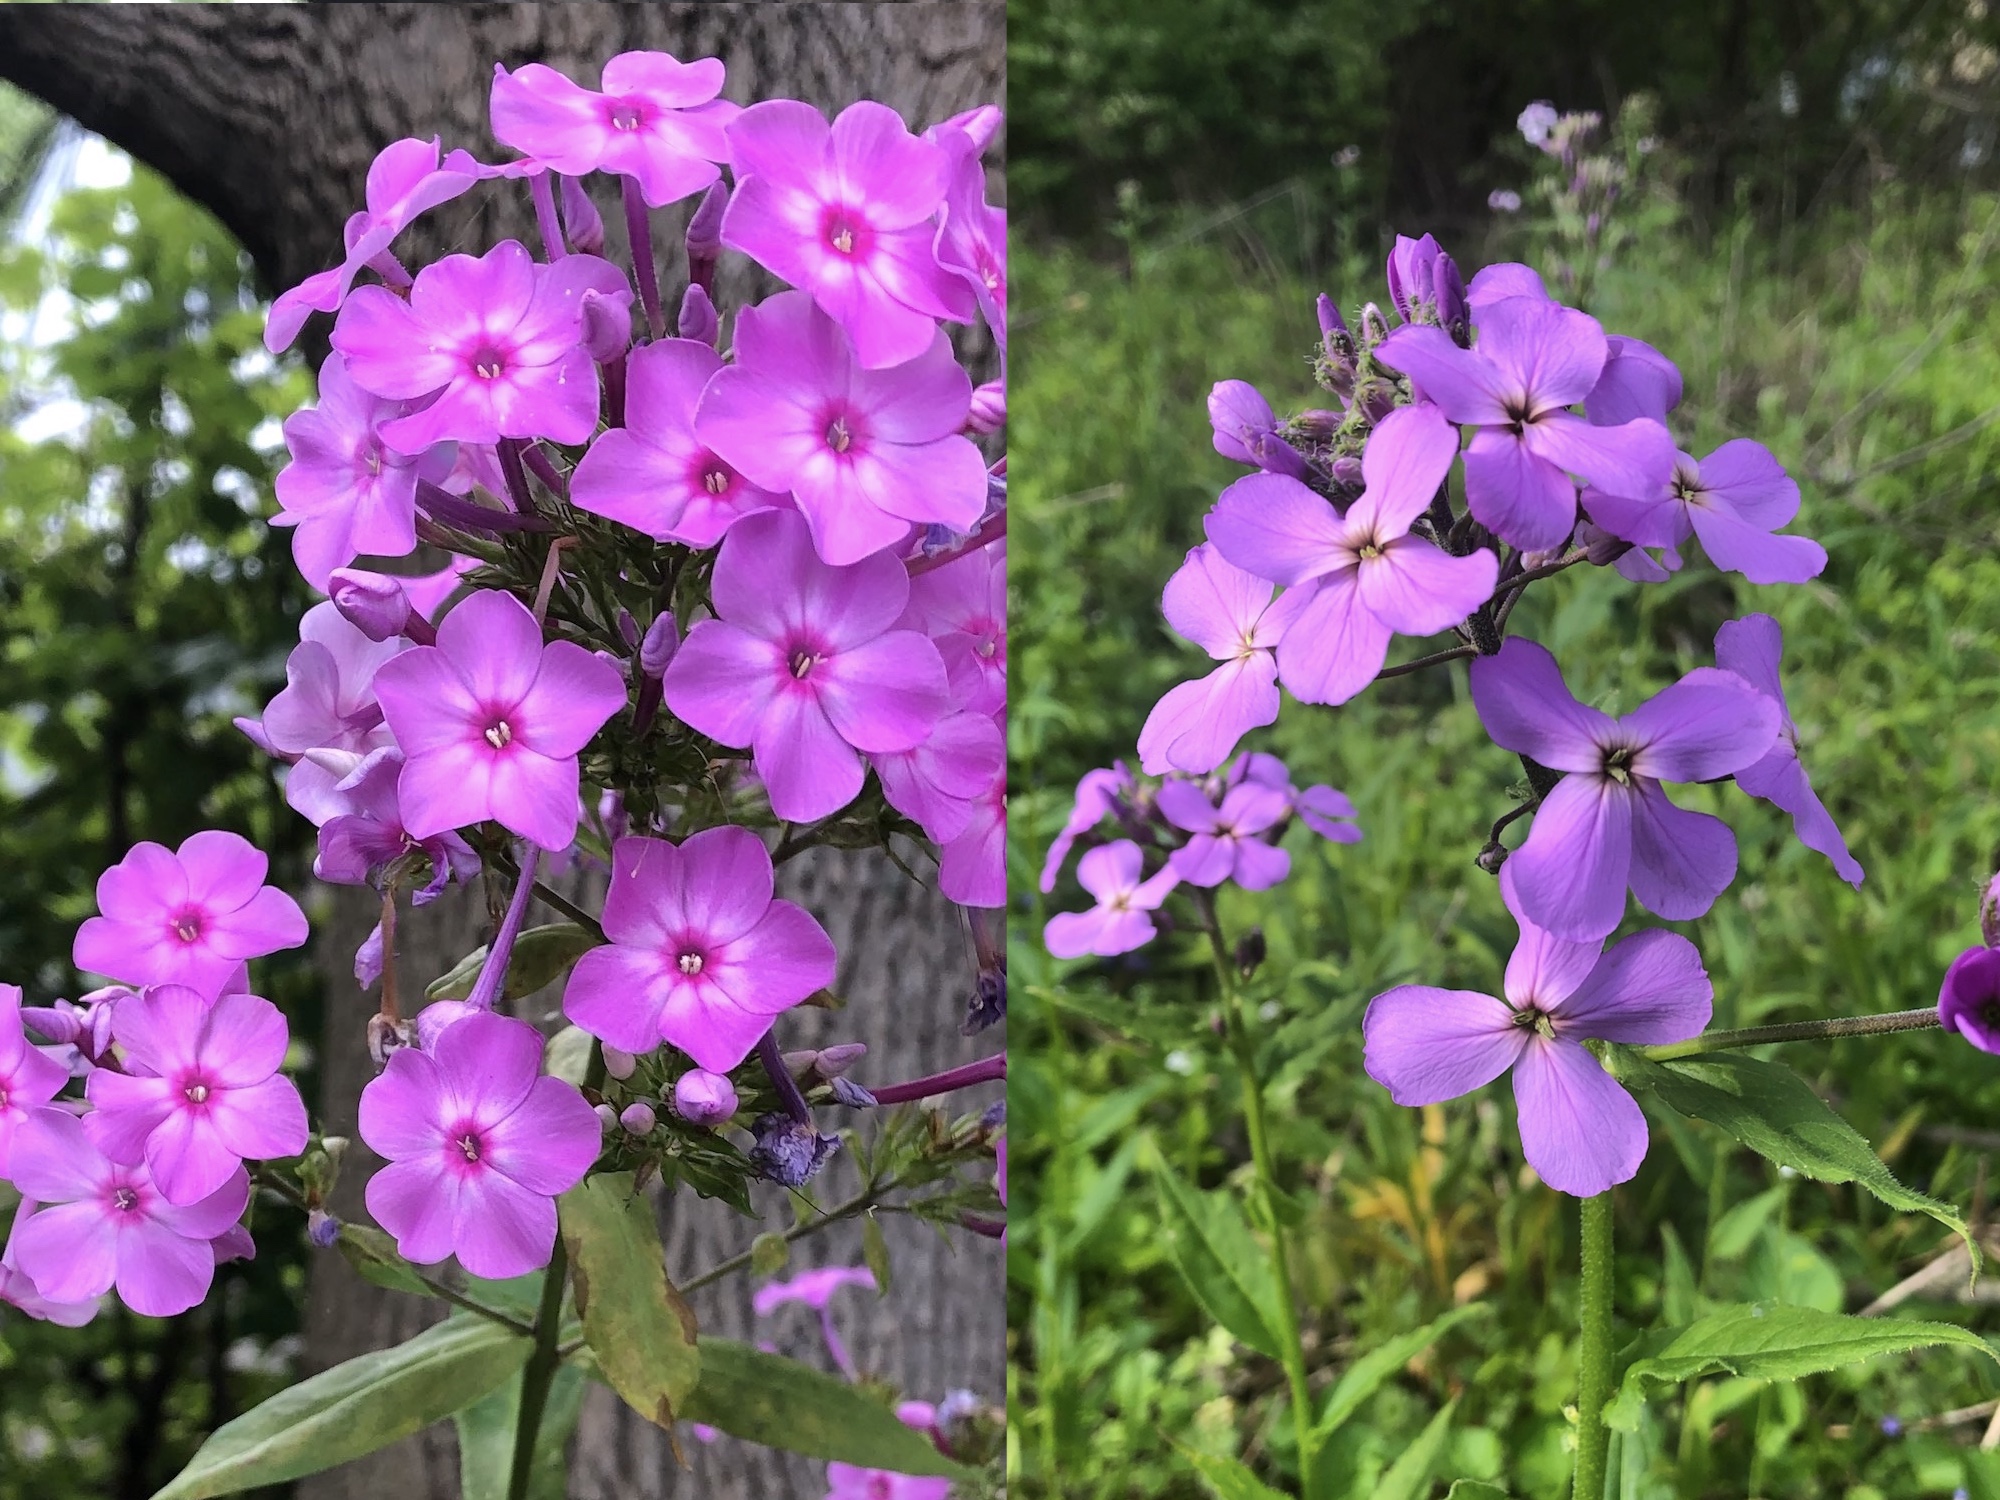 Difference between Tall Garden Phlox and Dames Rocket.